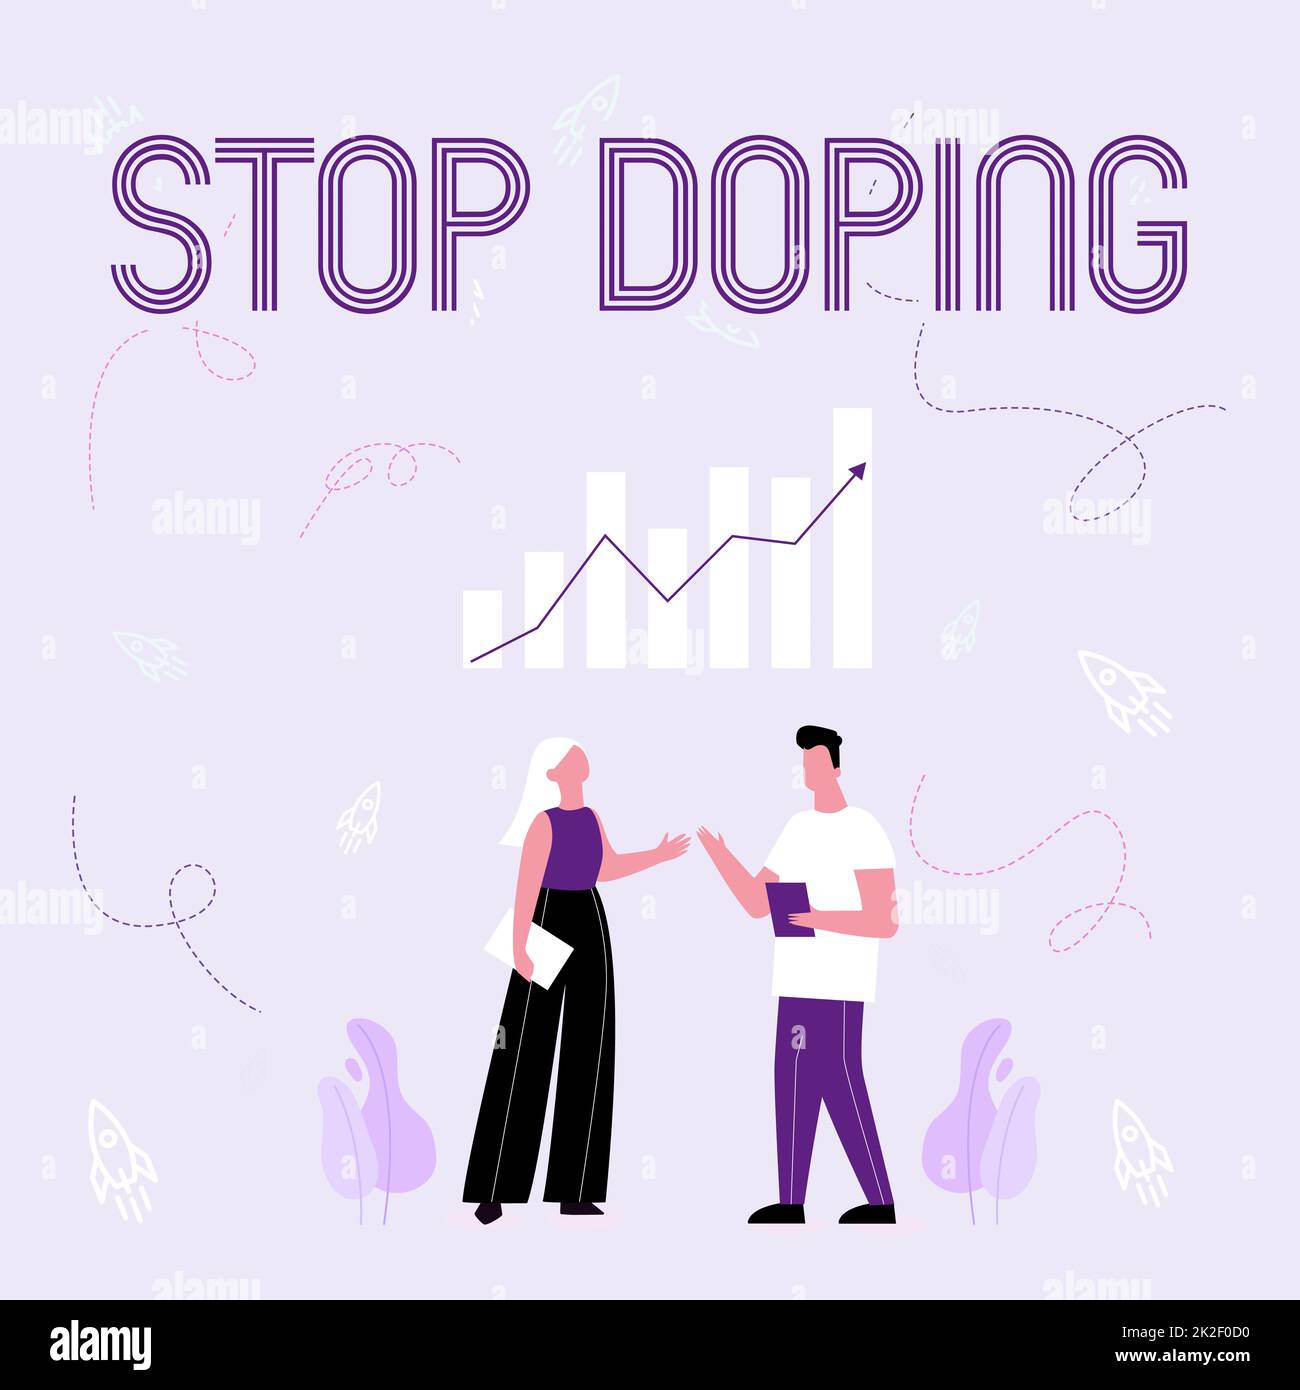 Sign displaying Stop Doping. Business concept do not use use banned athletic performance enhancing drugs Illustration Of Partners Sharing Wonderful Ideas For Skill Improvement. Stock Photo